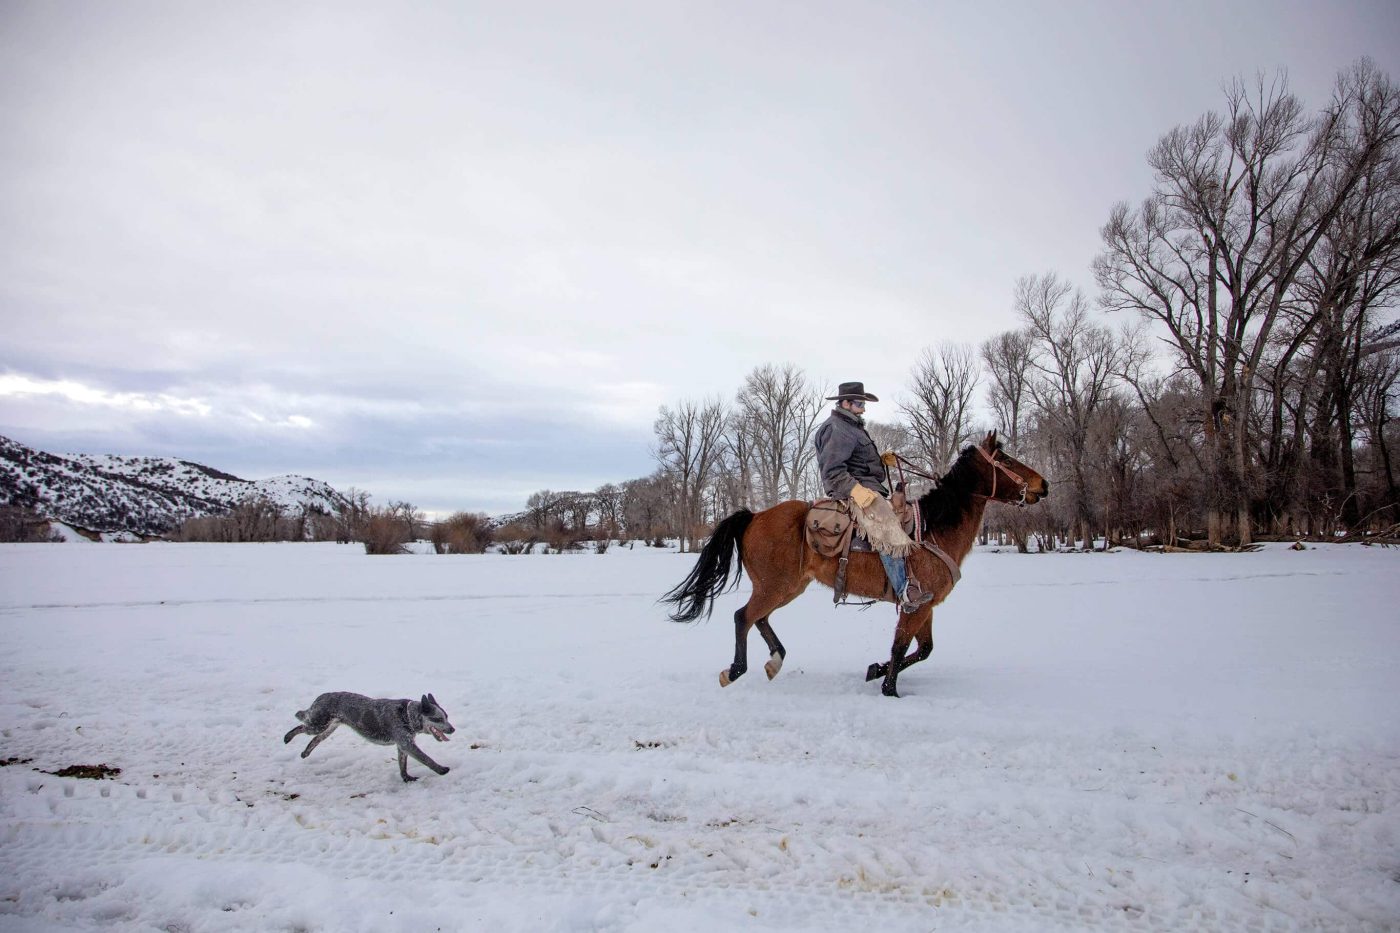 A cowboy and his dog cross the snowy Ladder Livestock ranch, a vast cattle and sheep-ranching operation that straddles the Wyoming-Colorado border.